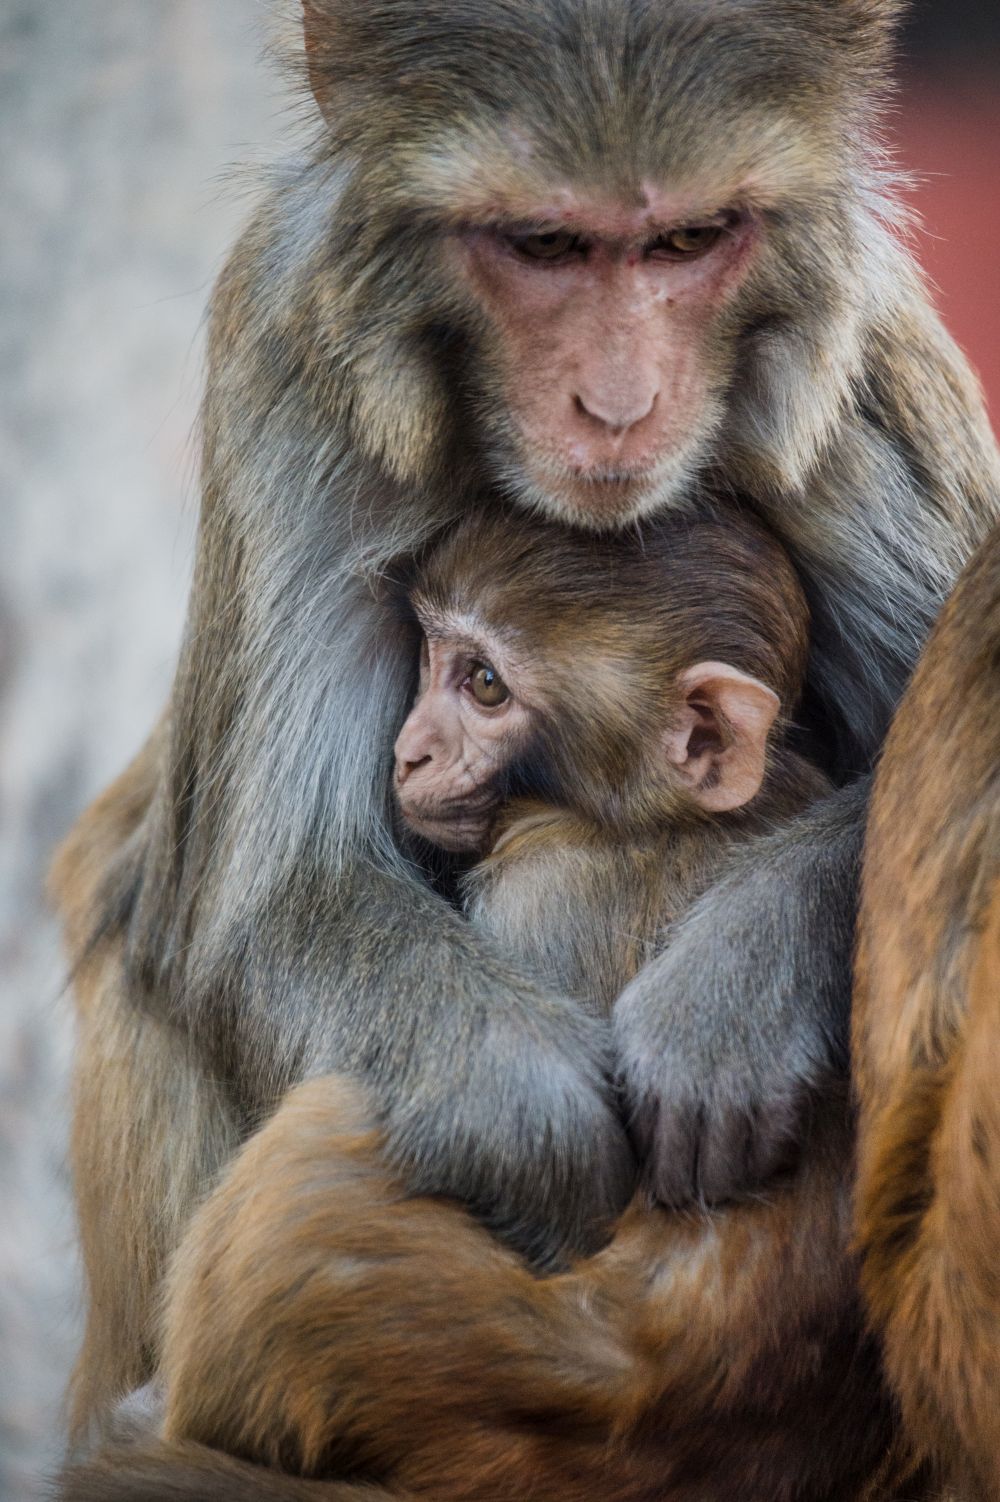 San Diego Zoo welcomes baby De Brazza's monkey for first time in 26 years